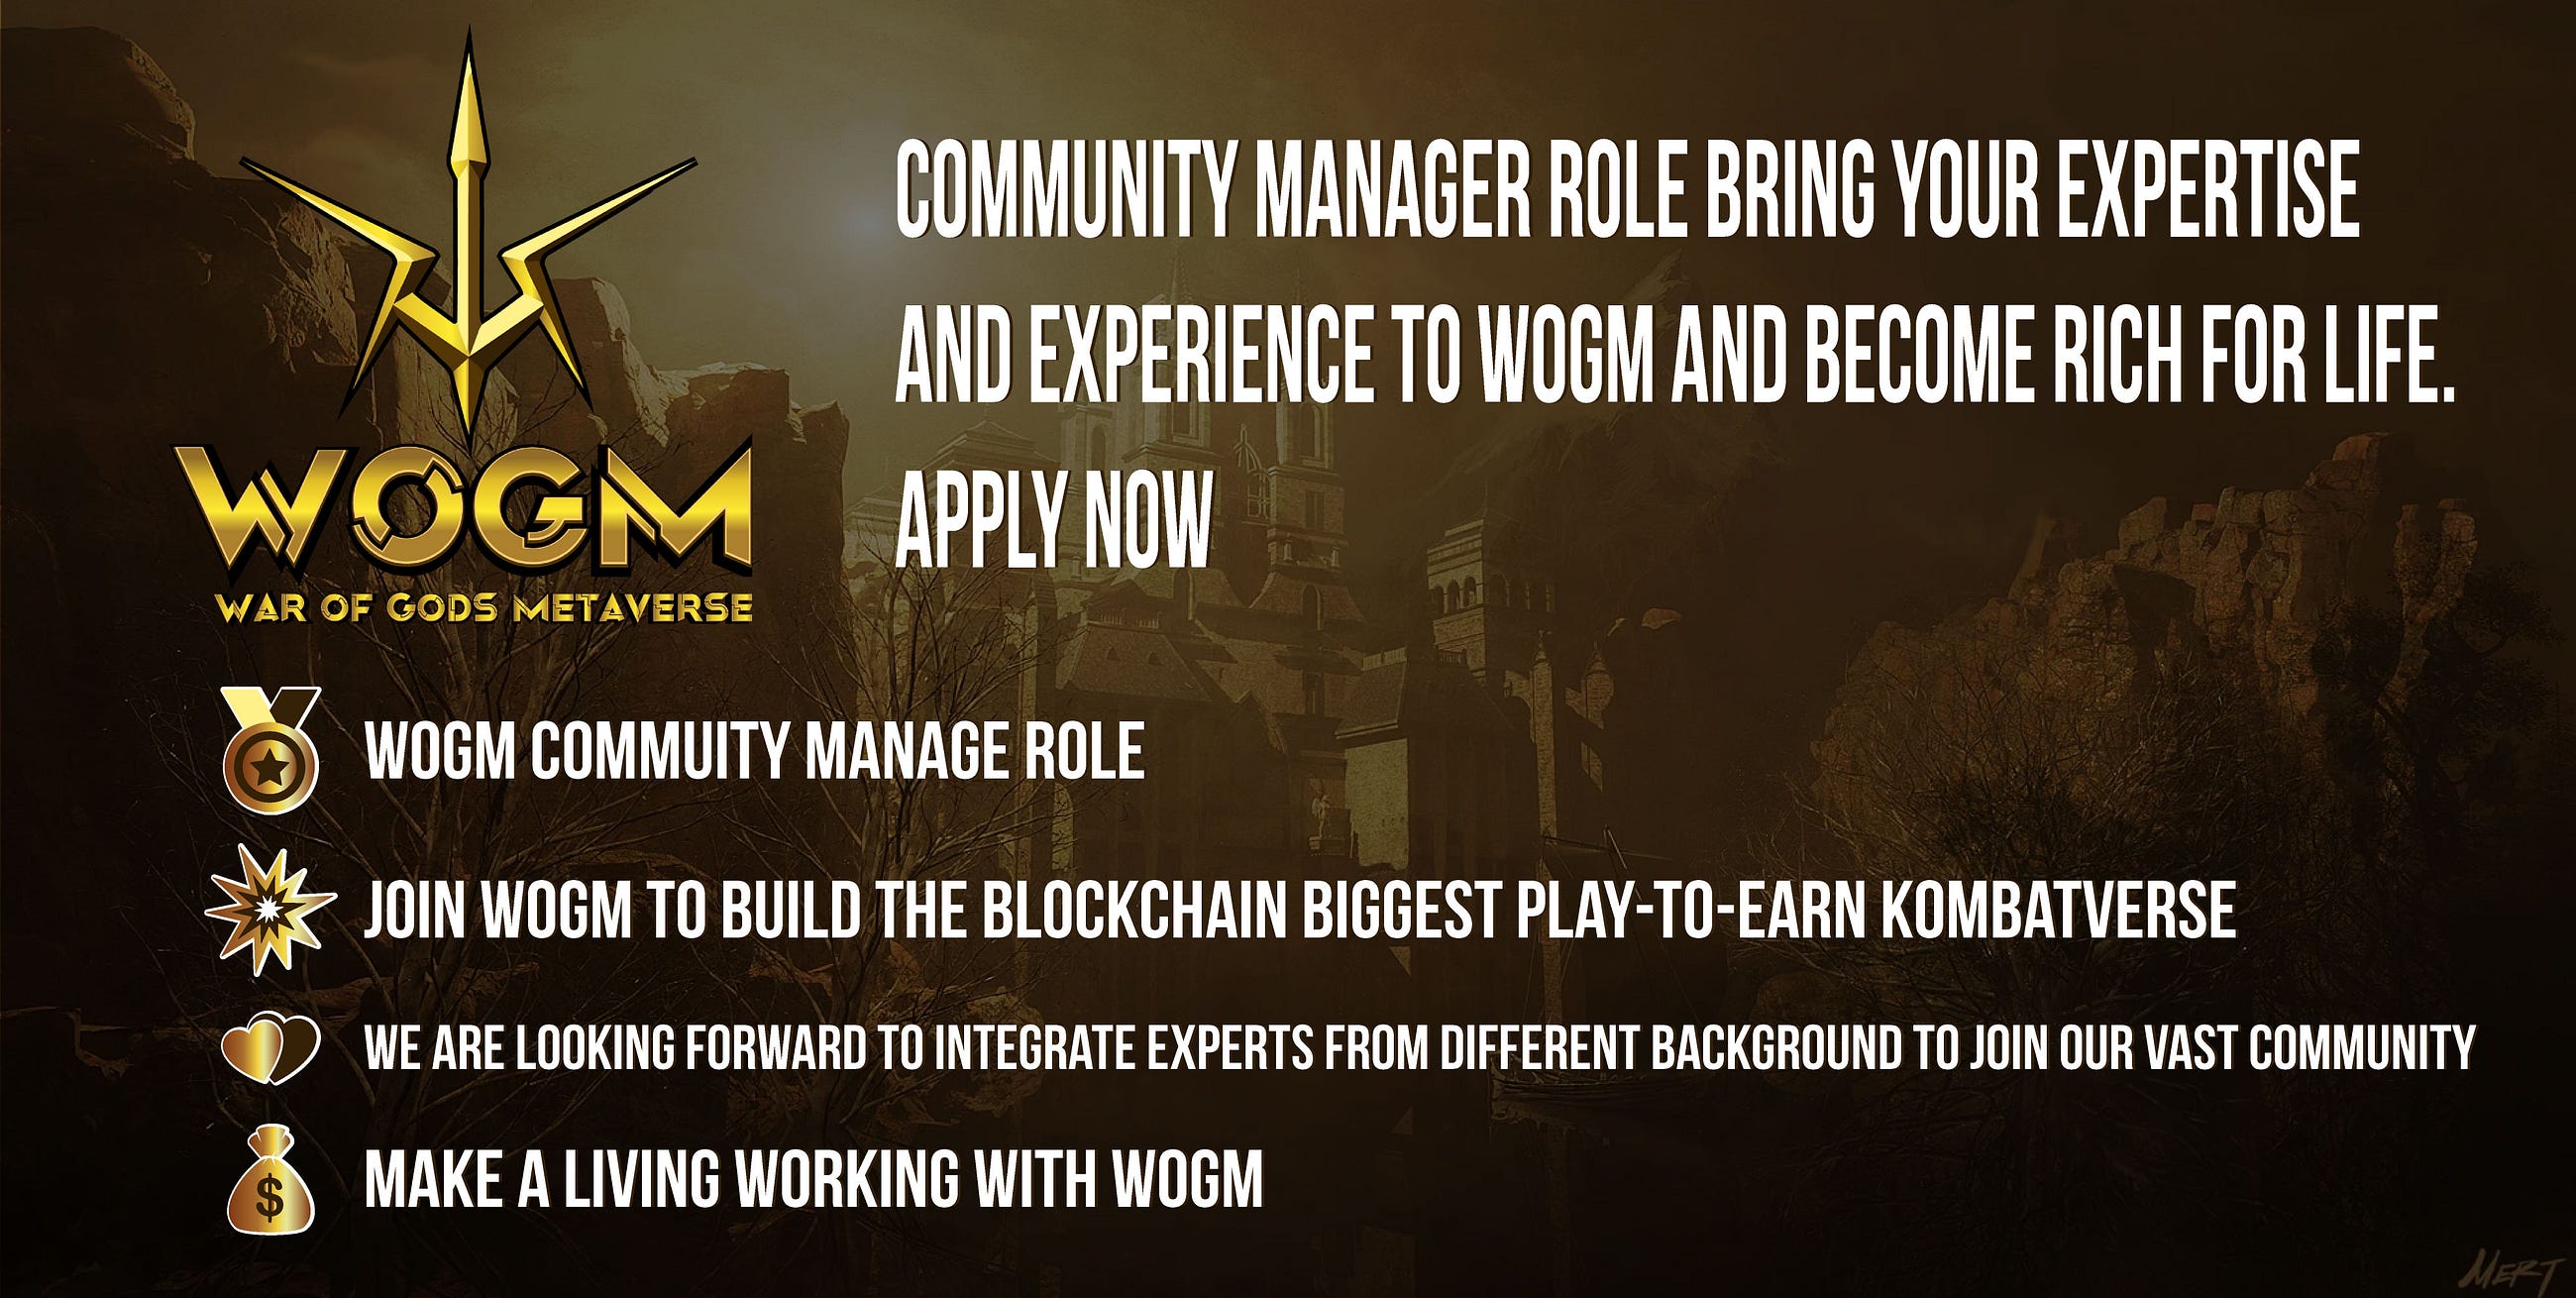 WOGM Community Manager ROLE